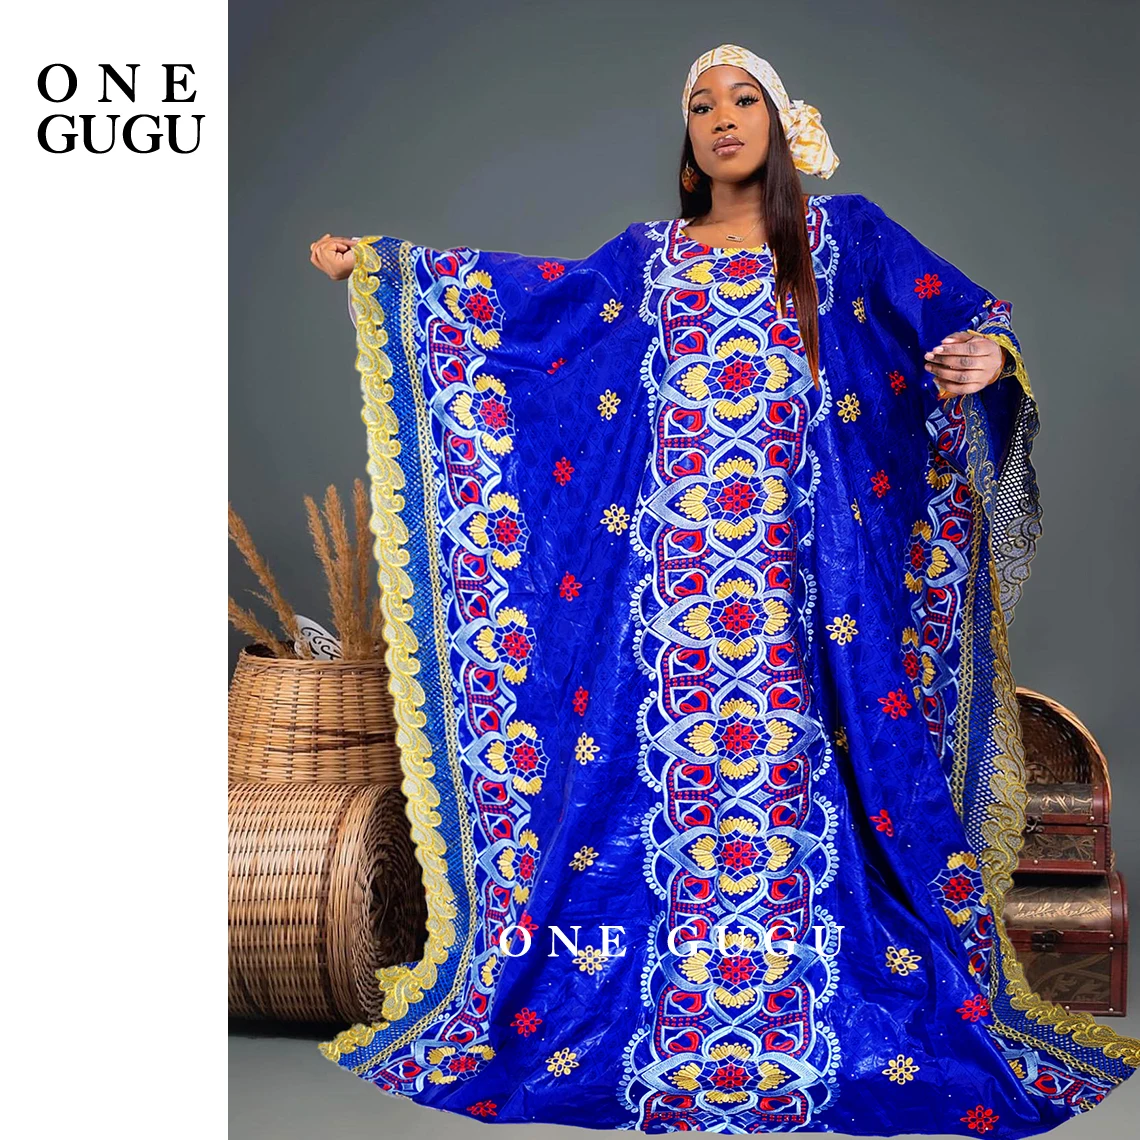 New African Dashiki Outfits Ryal Blue Bazin Riche Long Dress With Stones Embroidery Laces Nigerian Wedding Party Basin Dresses